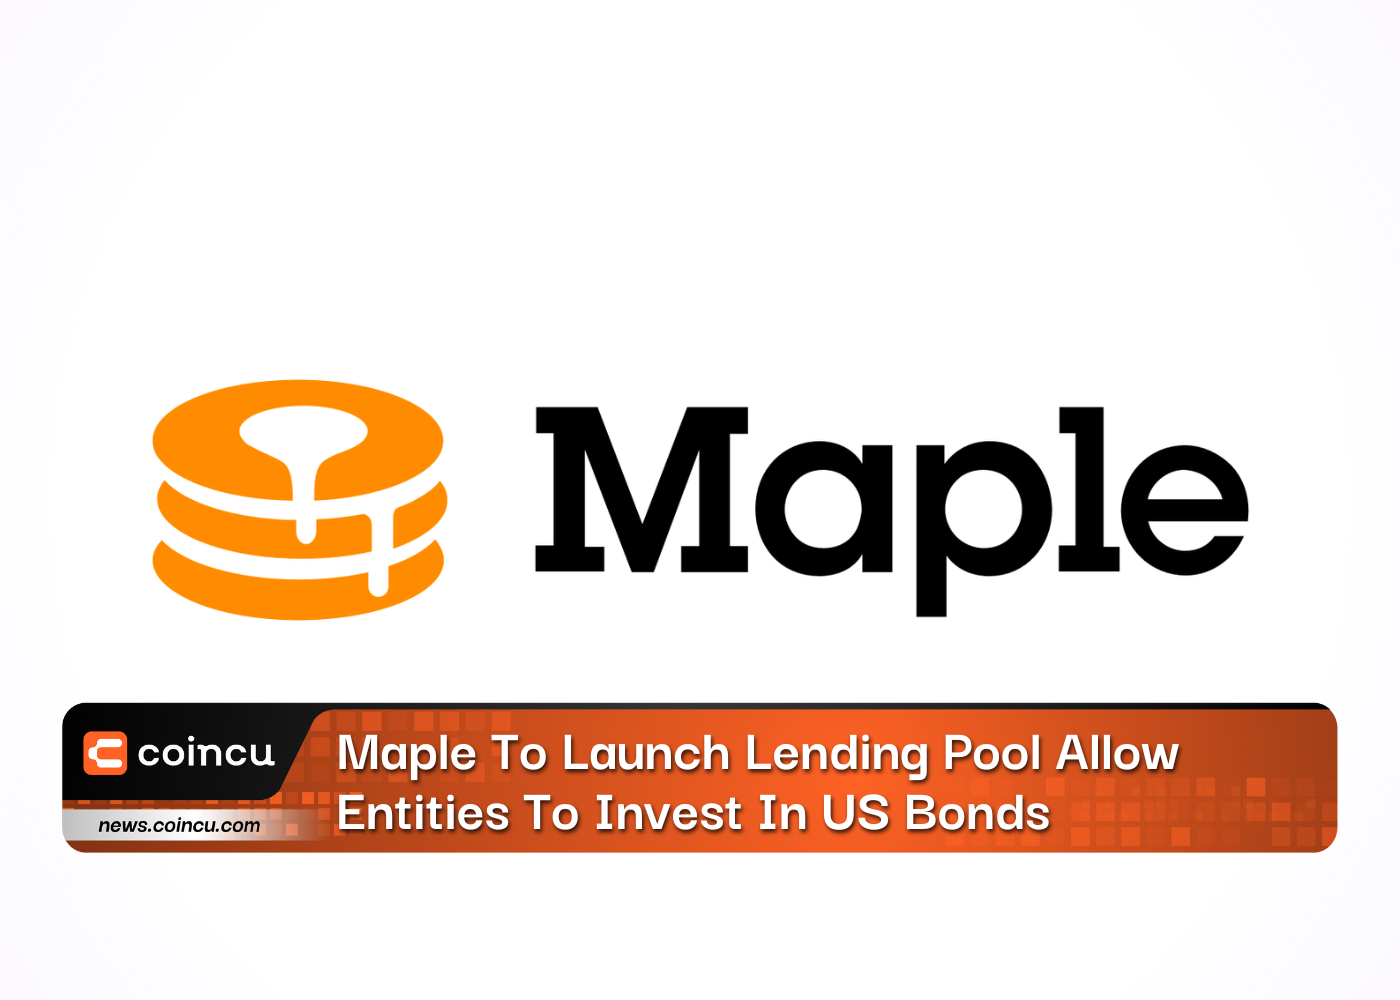 Maple To Launch Lending Pool Allow Entities To Invest In US Bonds